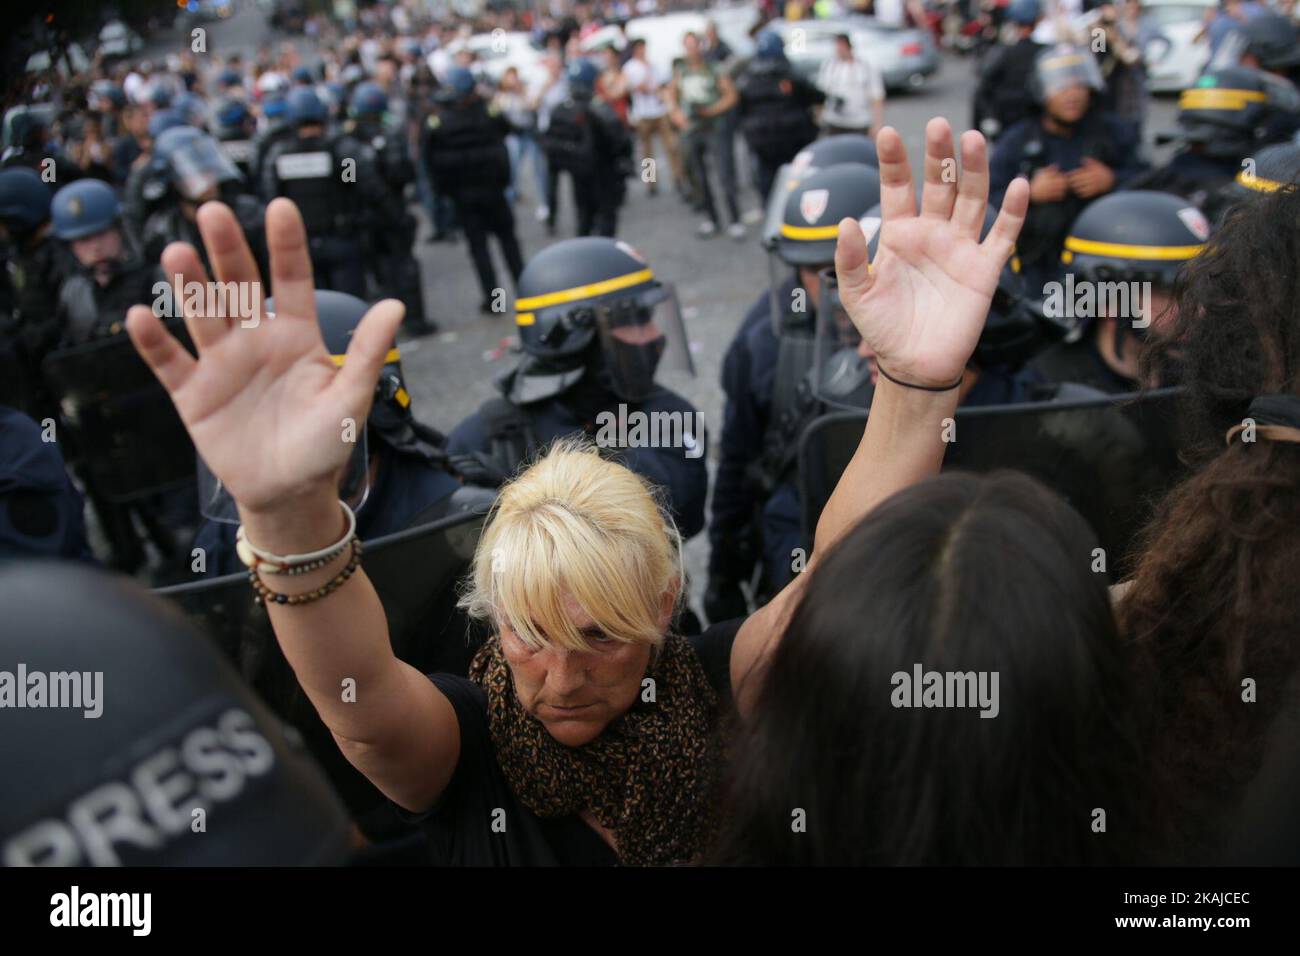 A woman Rise up her hands during the encapsulation of riot police next to la Bastille, CGT unionists Marched against Labour law this Wednesday, 23 June 2016 in Paris, next to the Place of La Bastille. Today's march will be the 10th in a wave of protests against the government's disputed labour reforms that kicked off in March, with many descending into violence, notably in Paris and the western cities of Nantes and Rennes.  (Photo by Emilio Espejel/NurPhoto) *** Please Use Credit from Credit Field *** Stock Photo